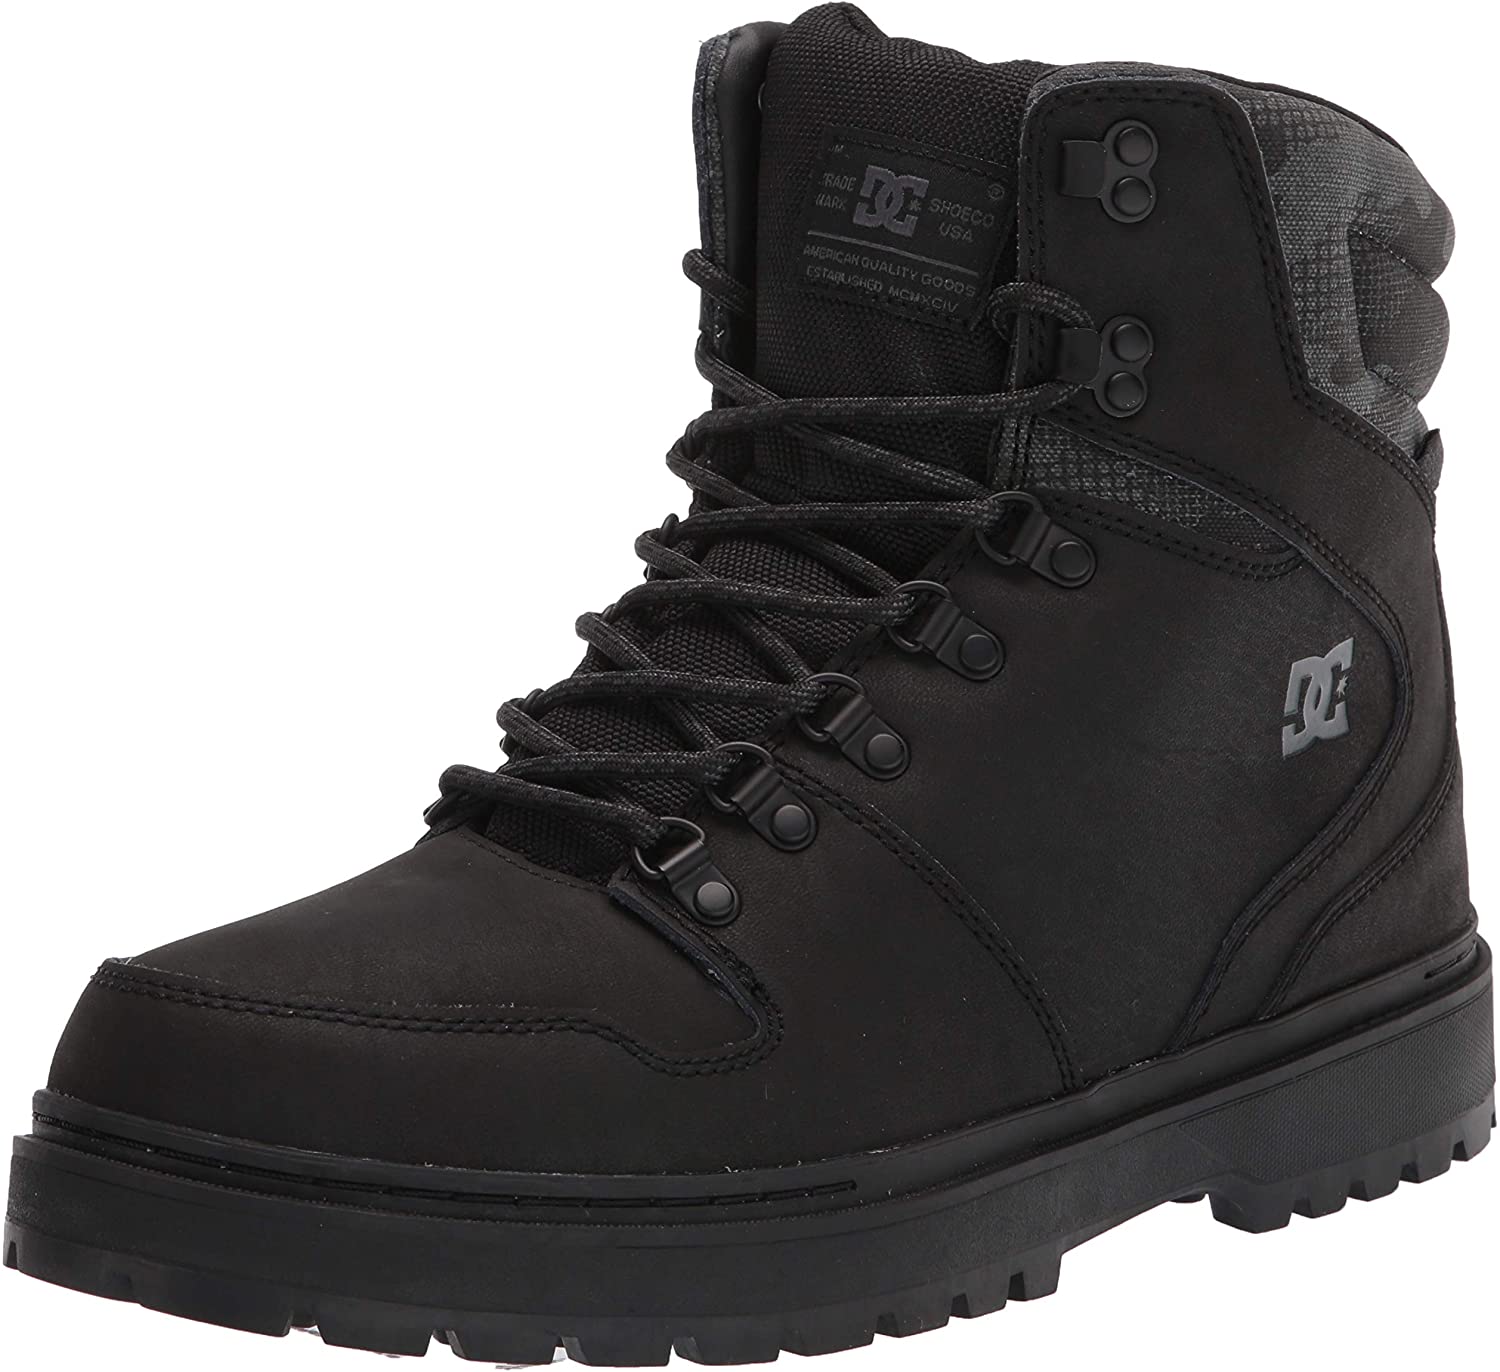 DC Shoes Peary Cold Weather Casual Snow Boot | eBay